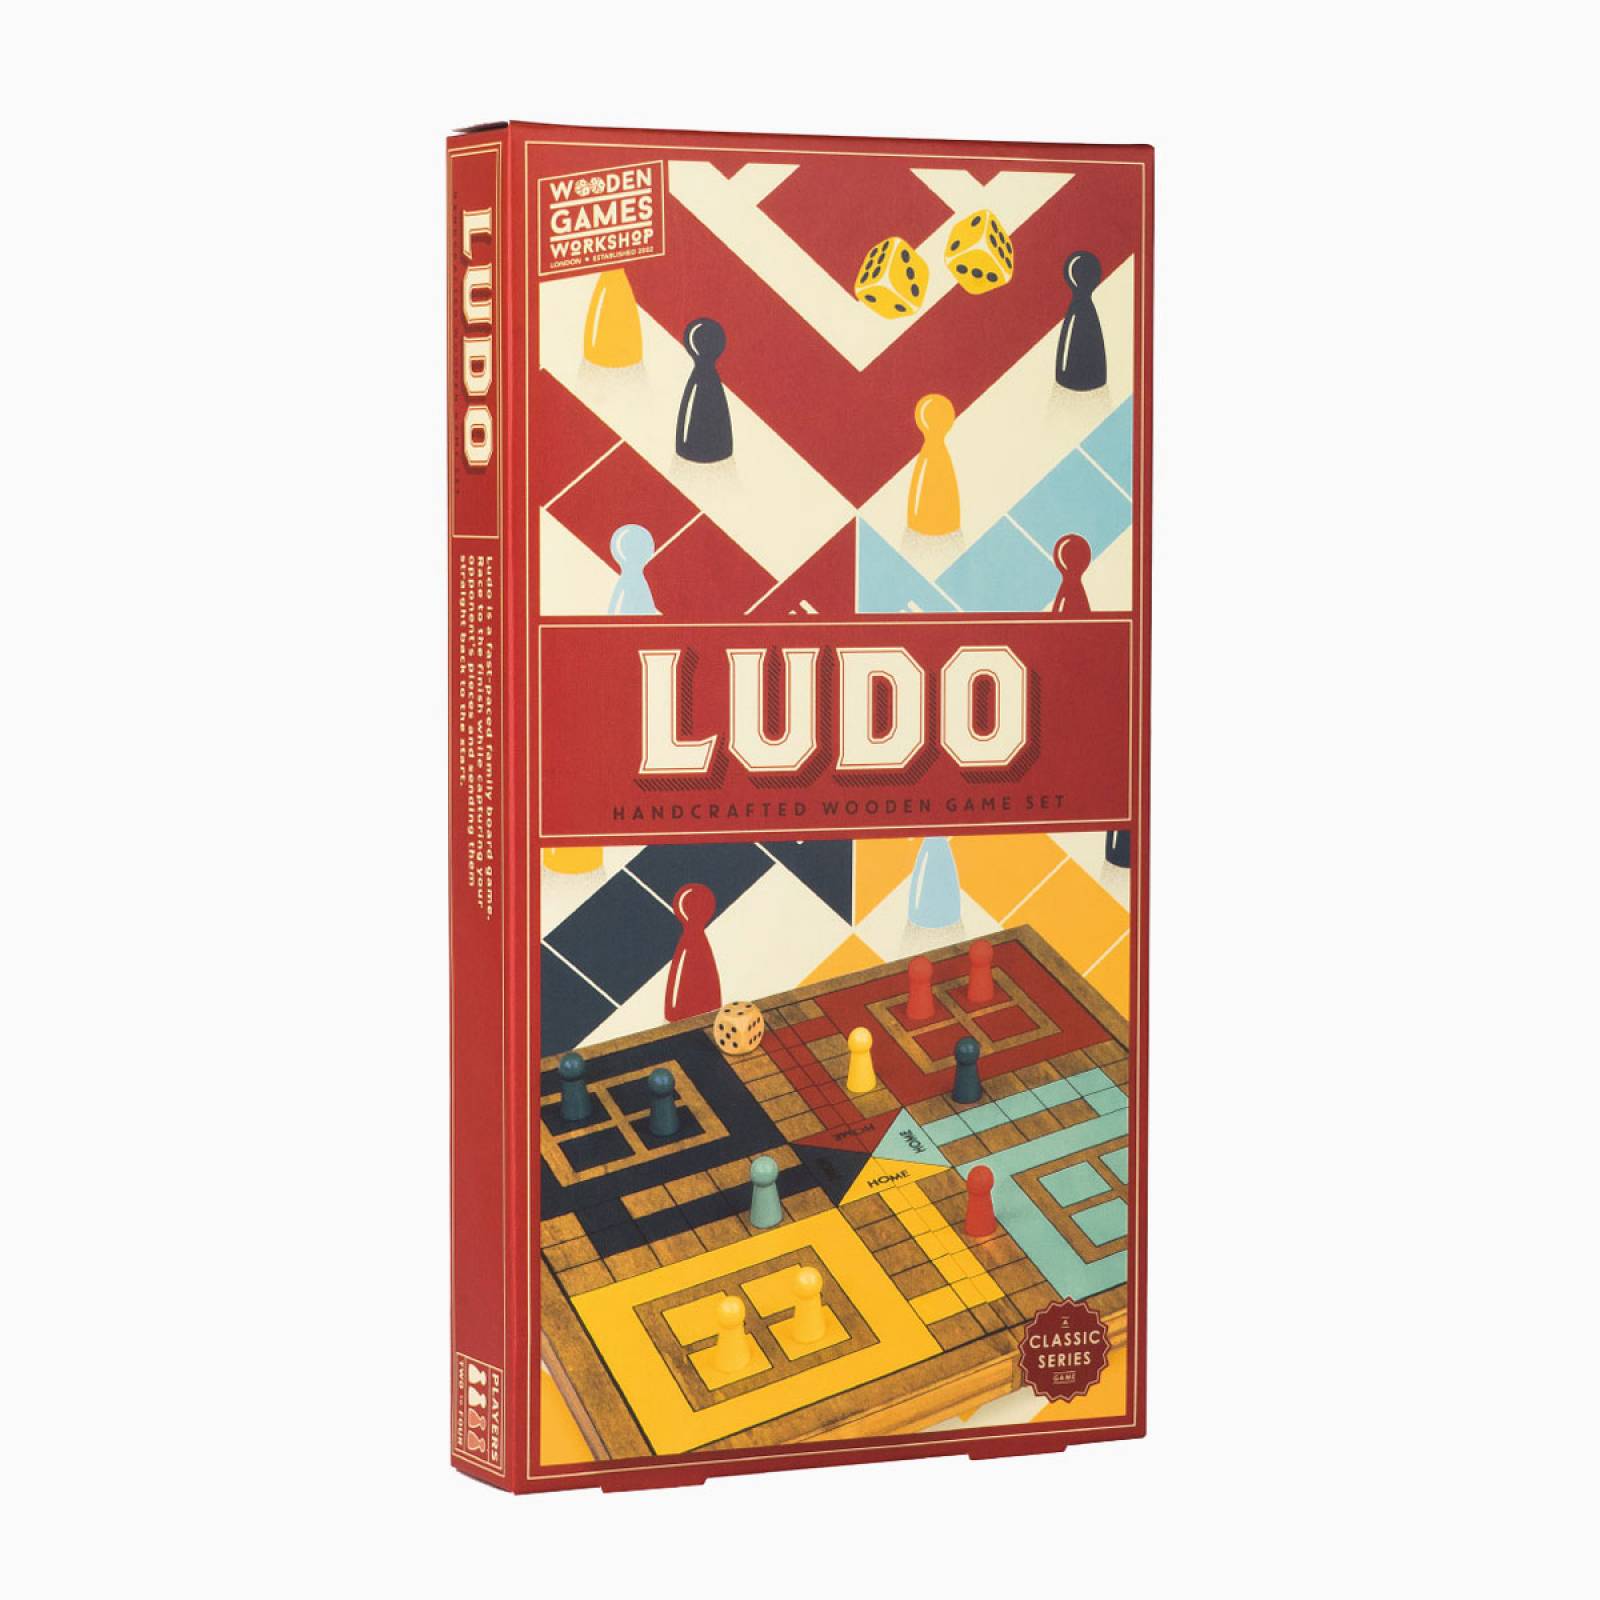 Ludo - Handcrafted Wooden Board Game 3+